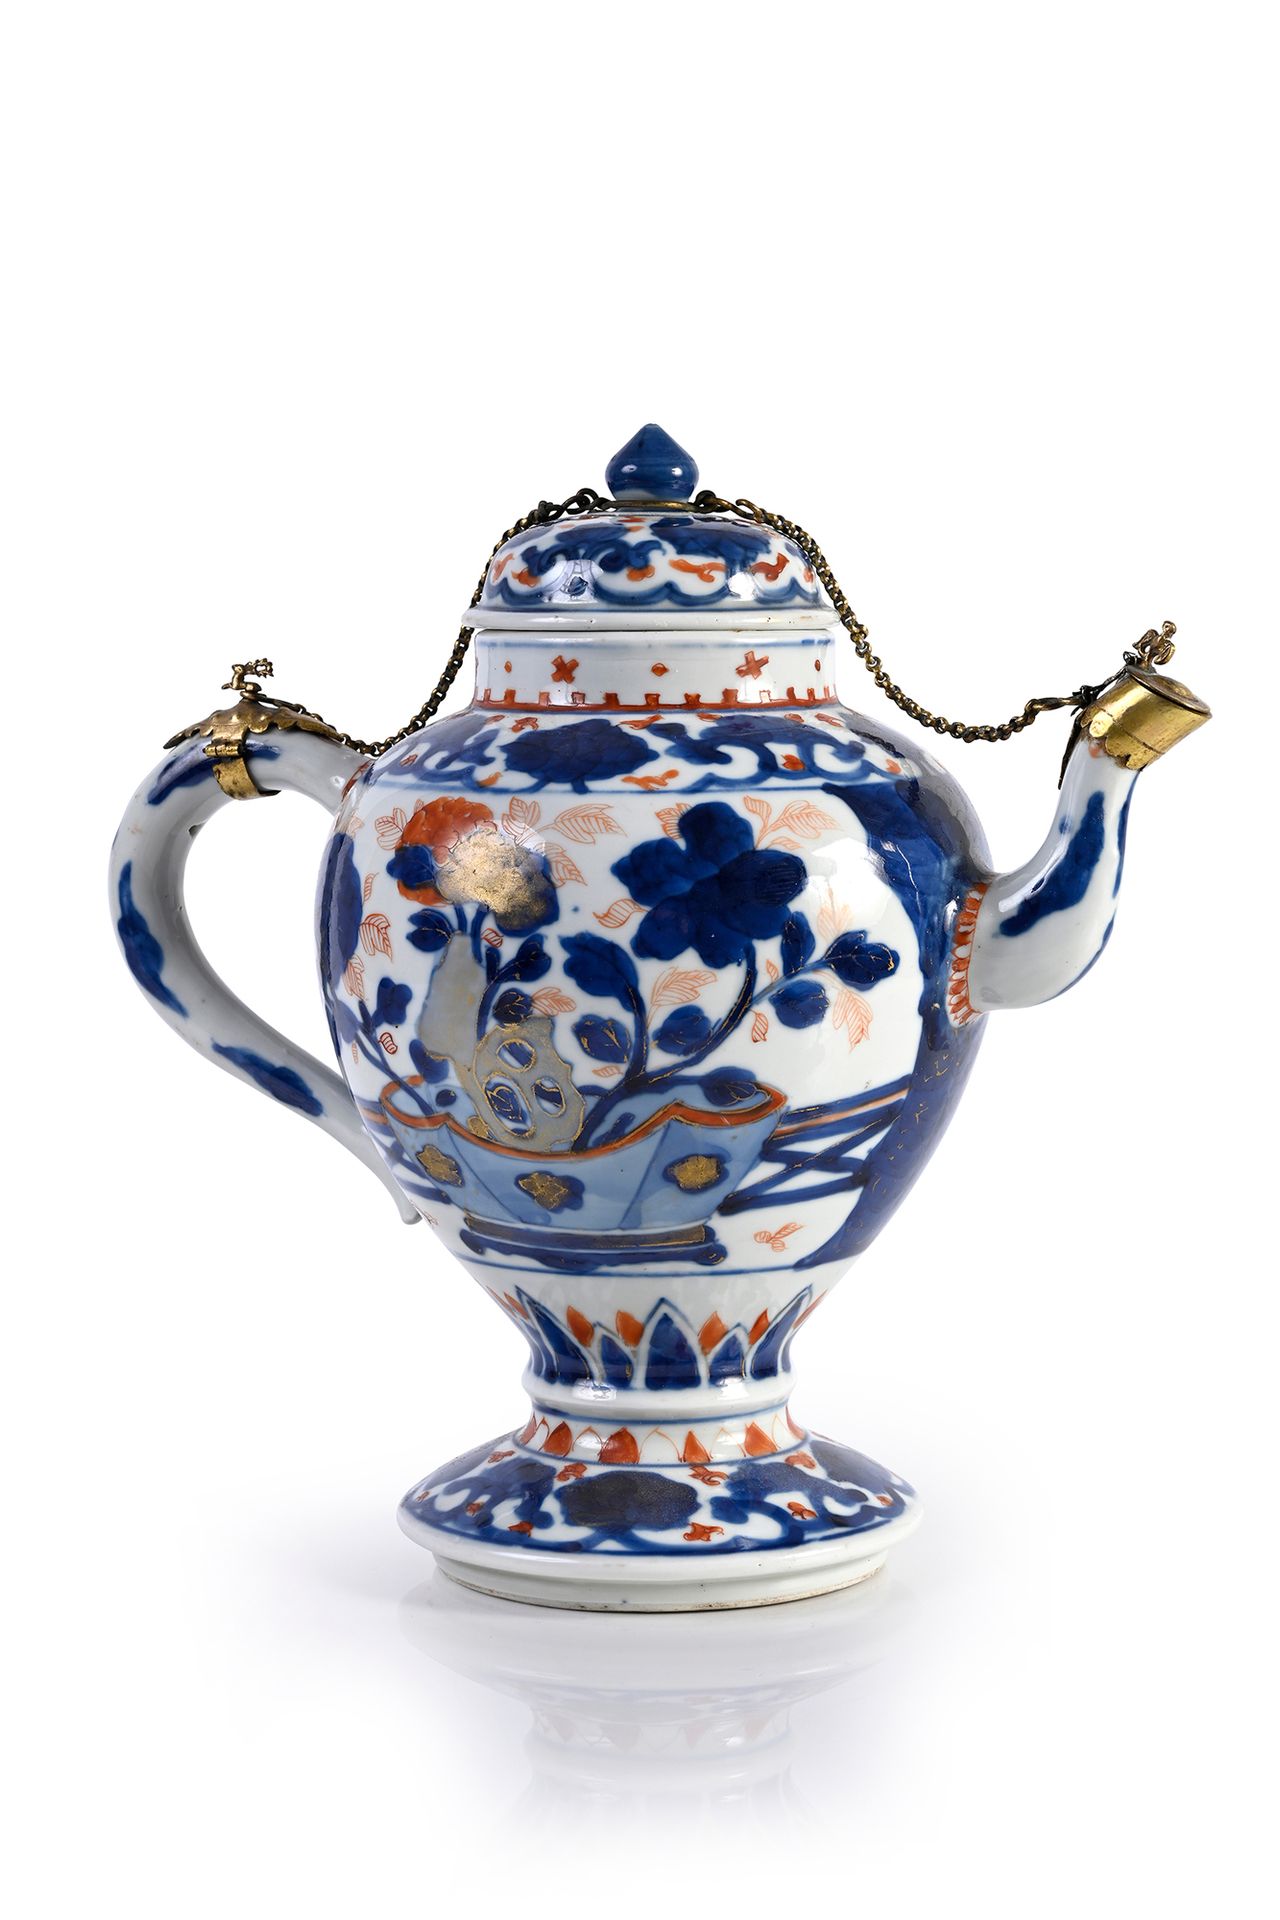 CHINE, XVIIIe siècle* Imari porcelain teapot
Mounted on a high foot, with a deco&hellip;